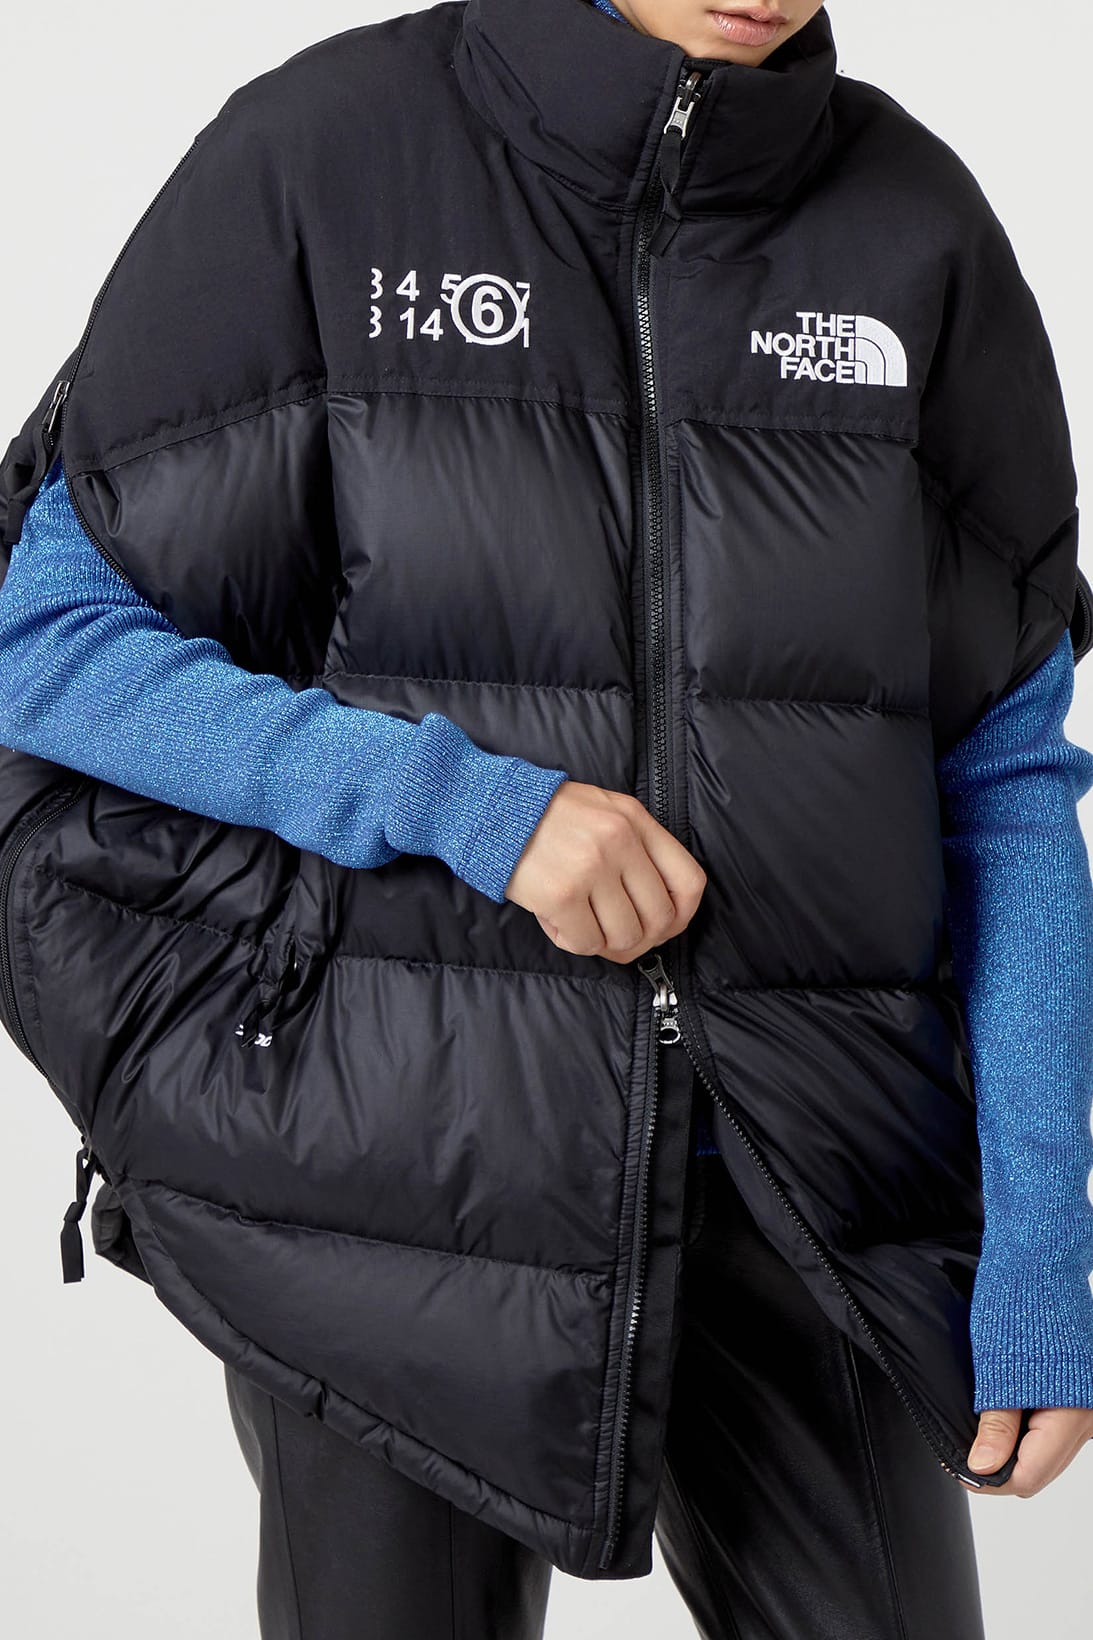 next the north face